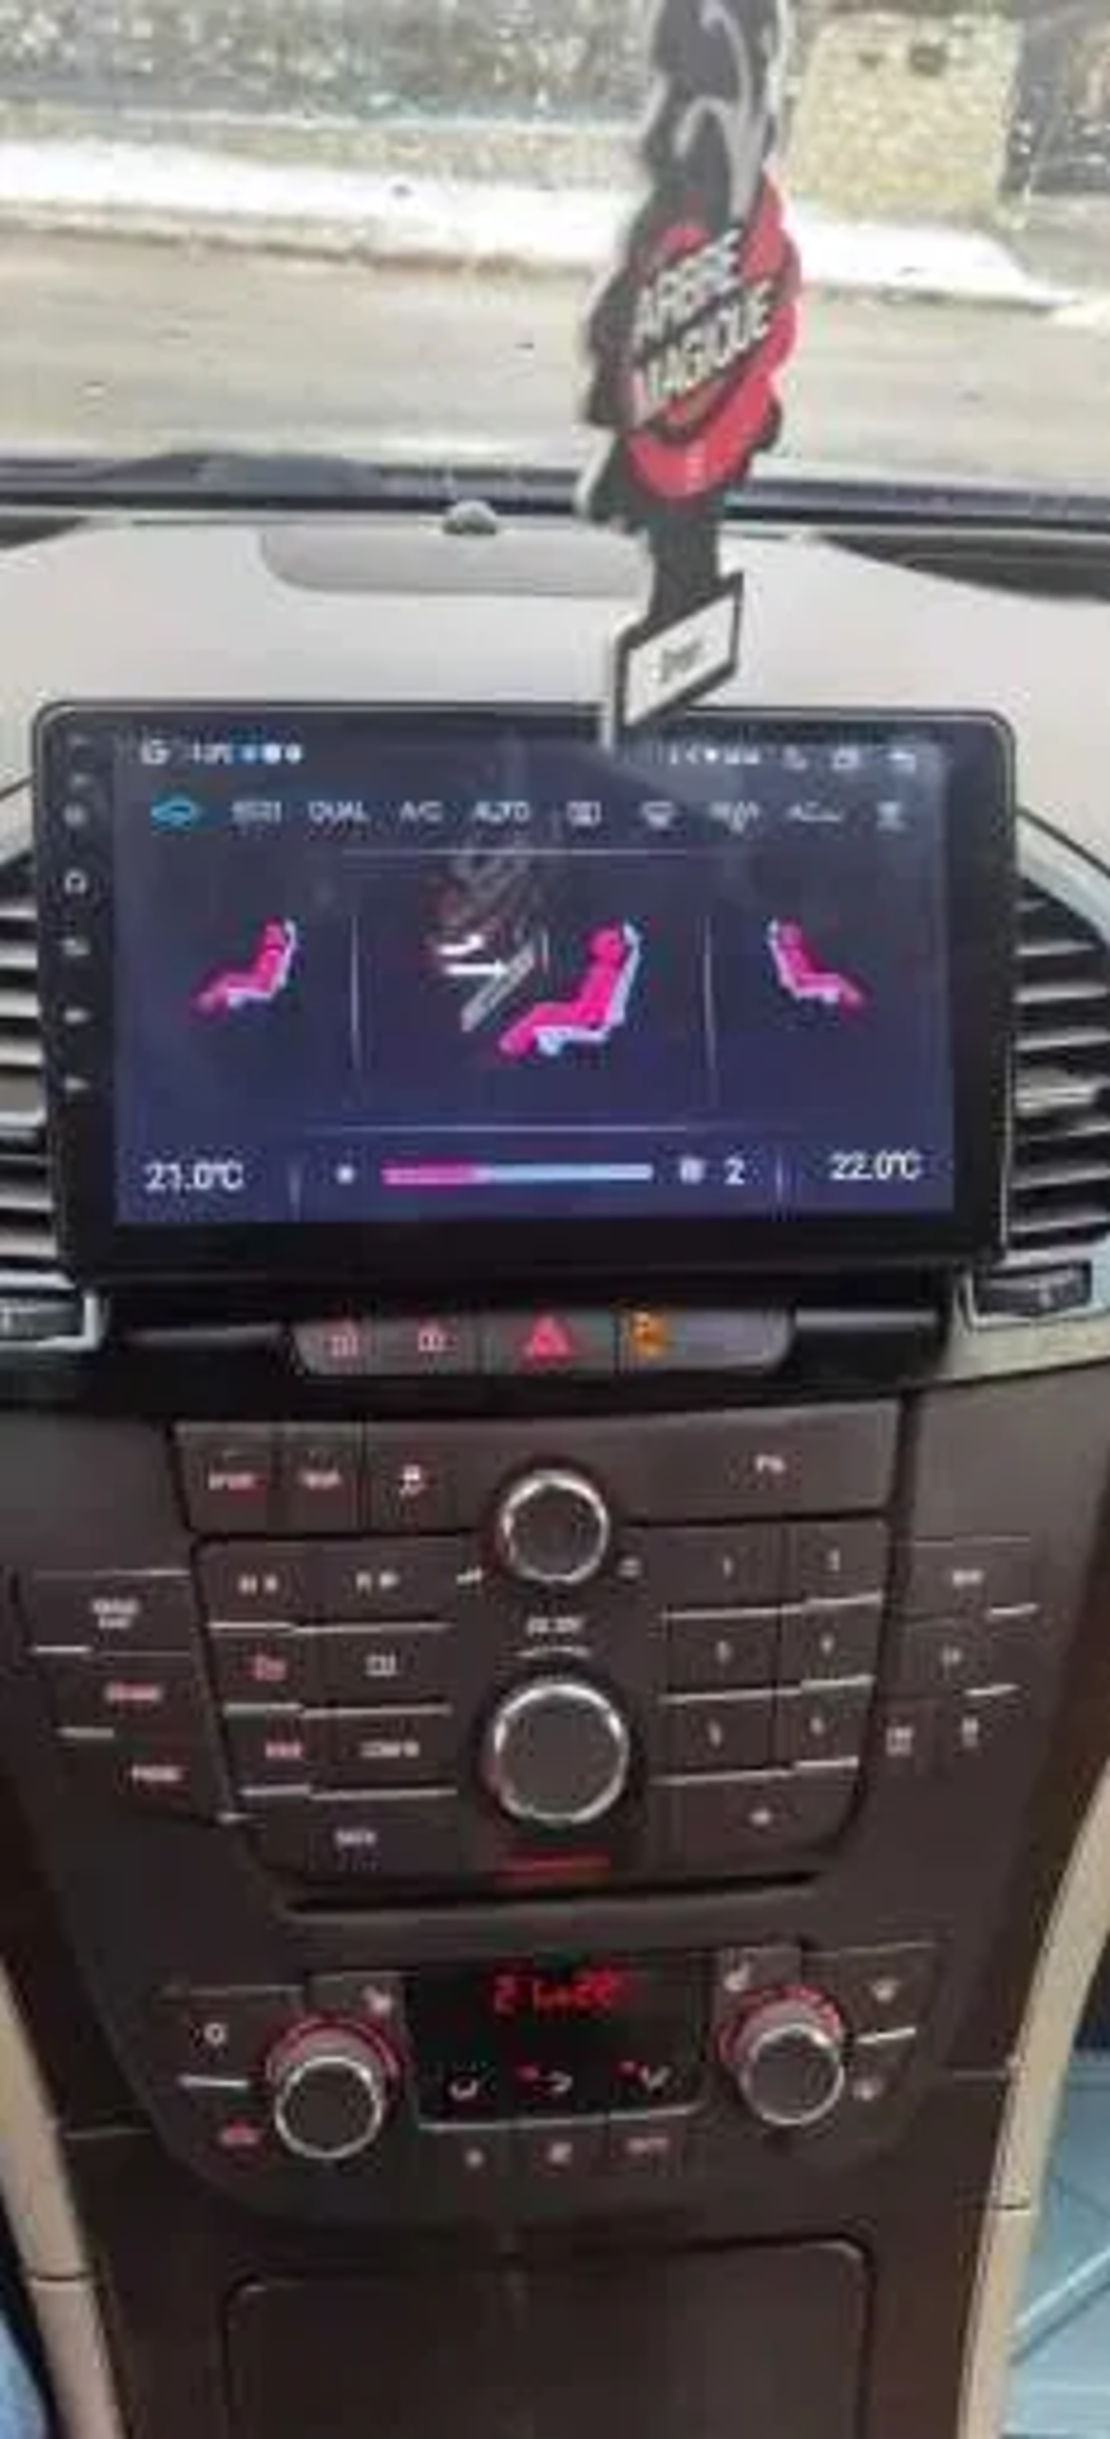 Buick Regal 2009-2013 Android Multimedia/Navigation